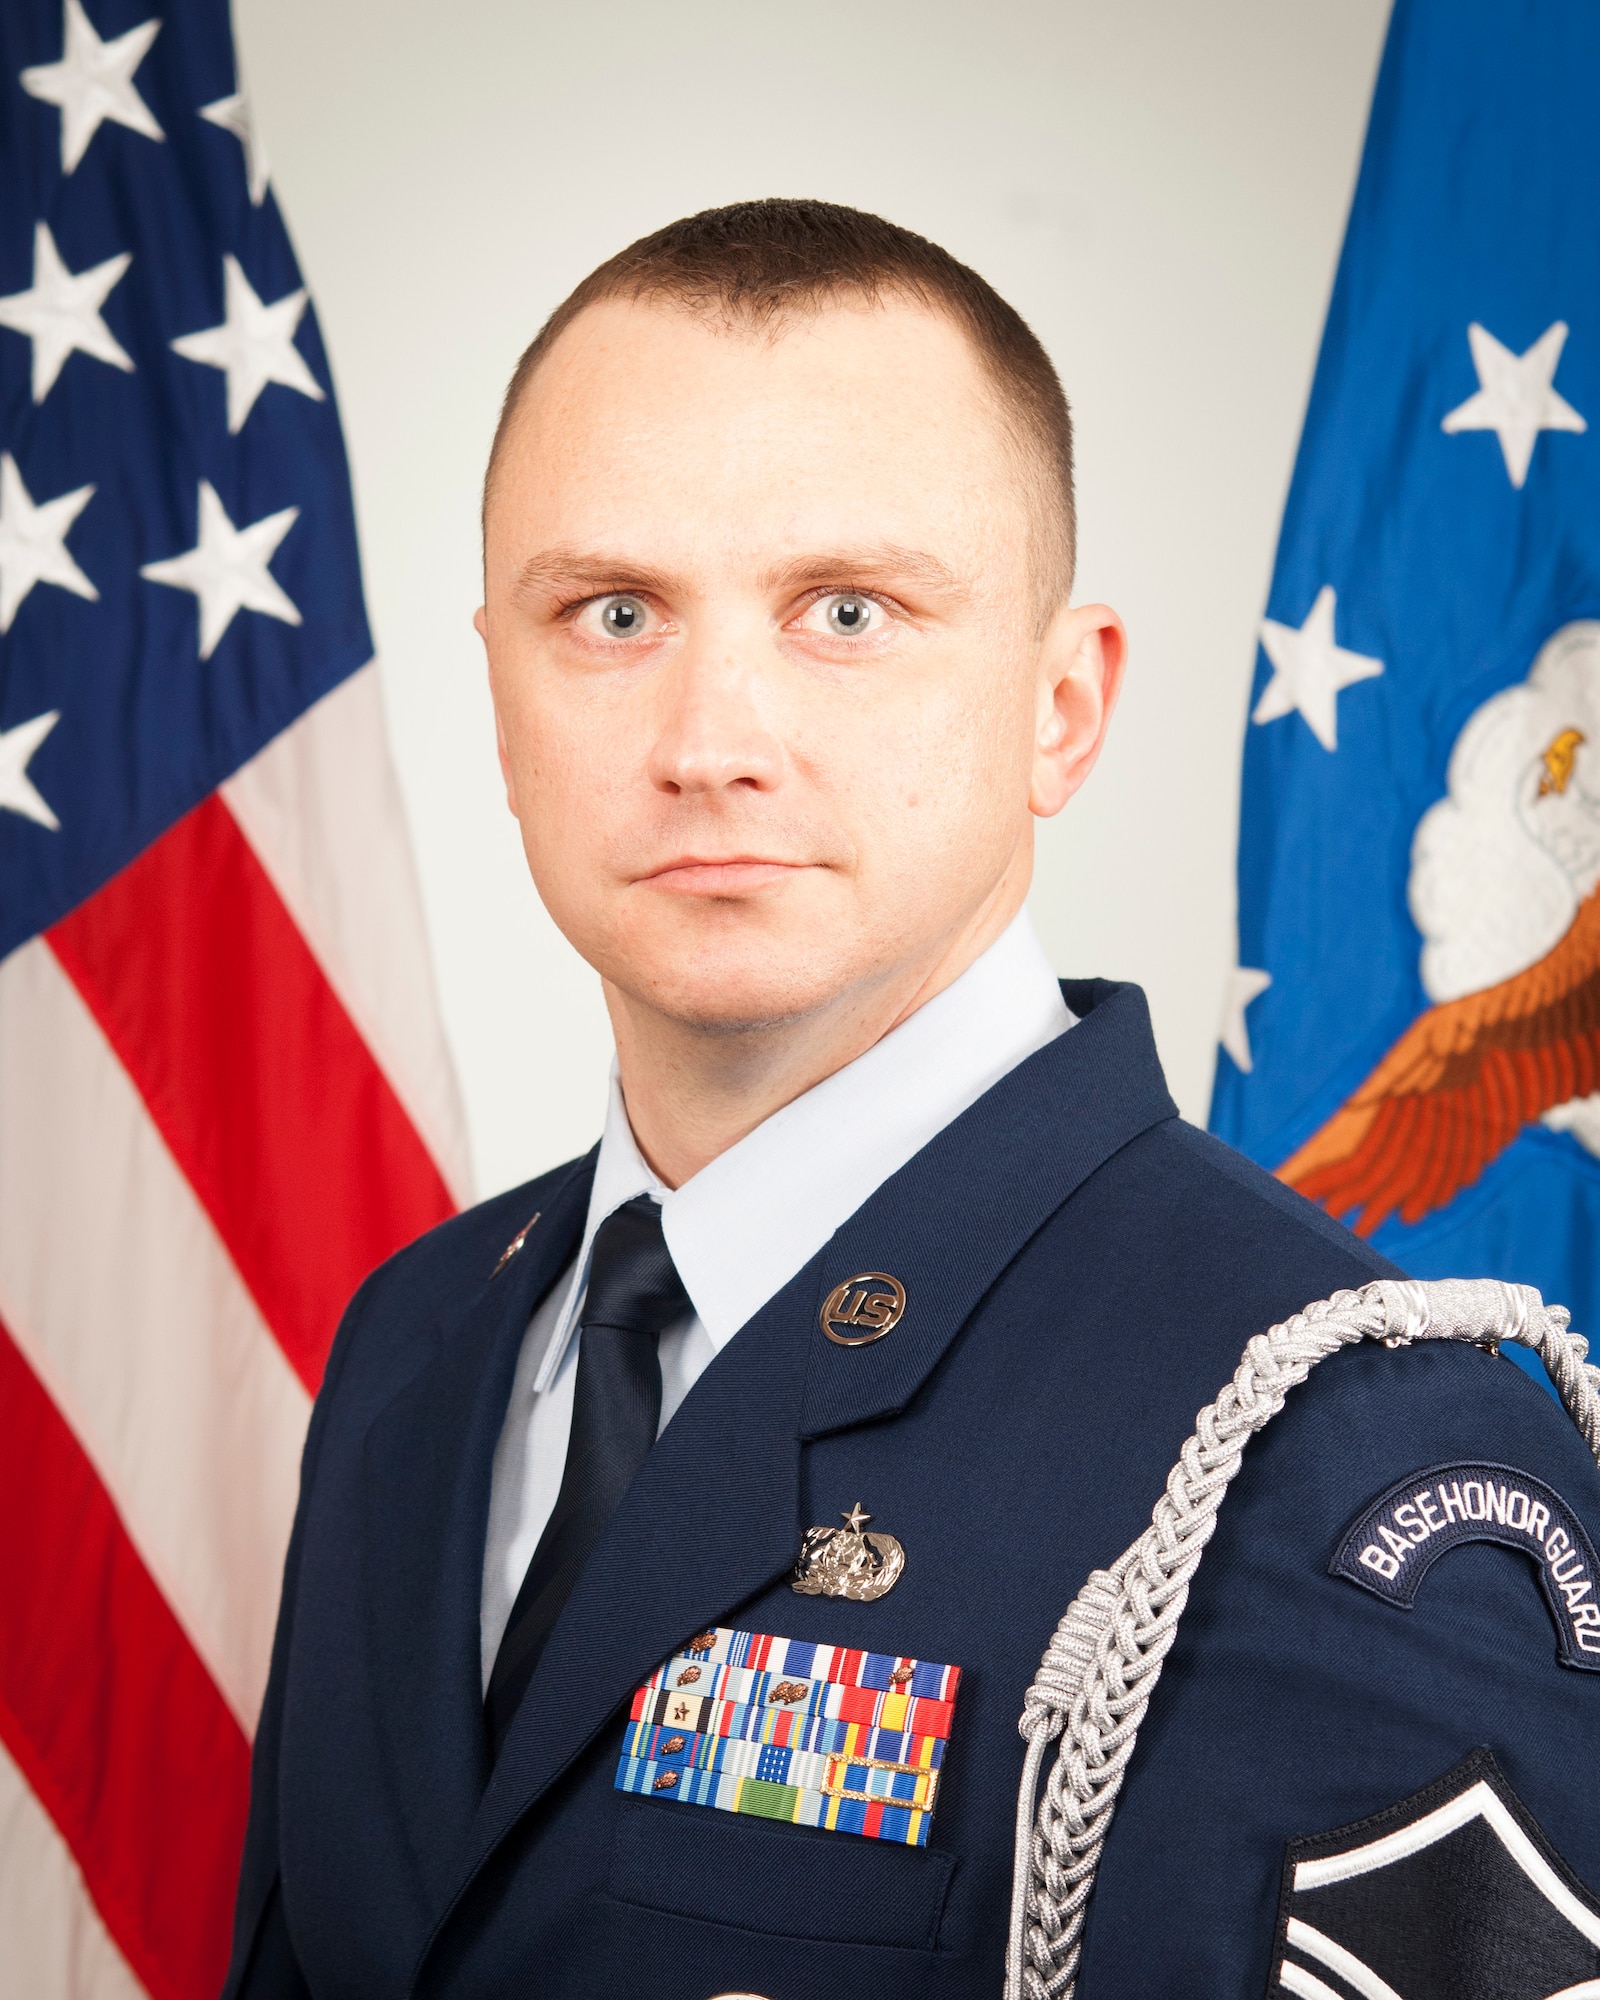 Master Sgt. Adam Reynolds poses for an official portrait at Grissom Air Reserve Base, Ind., January 10, 2019. Reynolds was appointed as Grissom's Honor Guard program manager shortly after joining the unit. (U.S. Air Force photo by Master Sgt. Benjamin Mota)